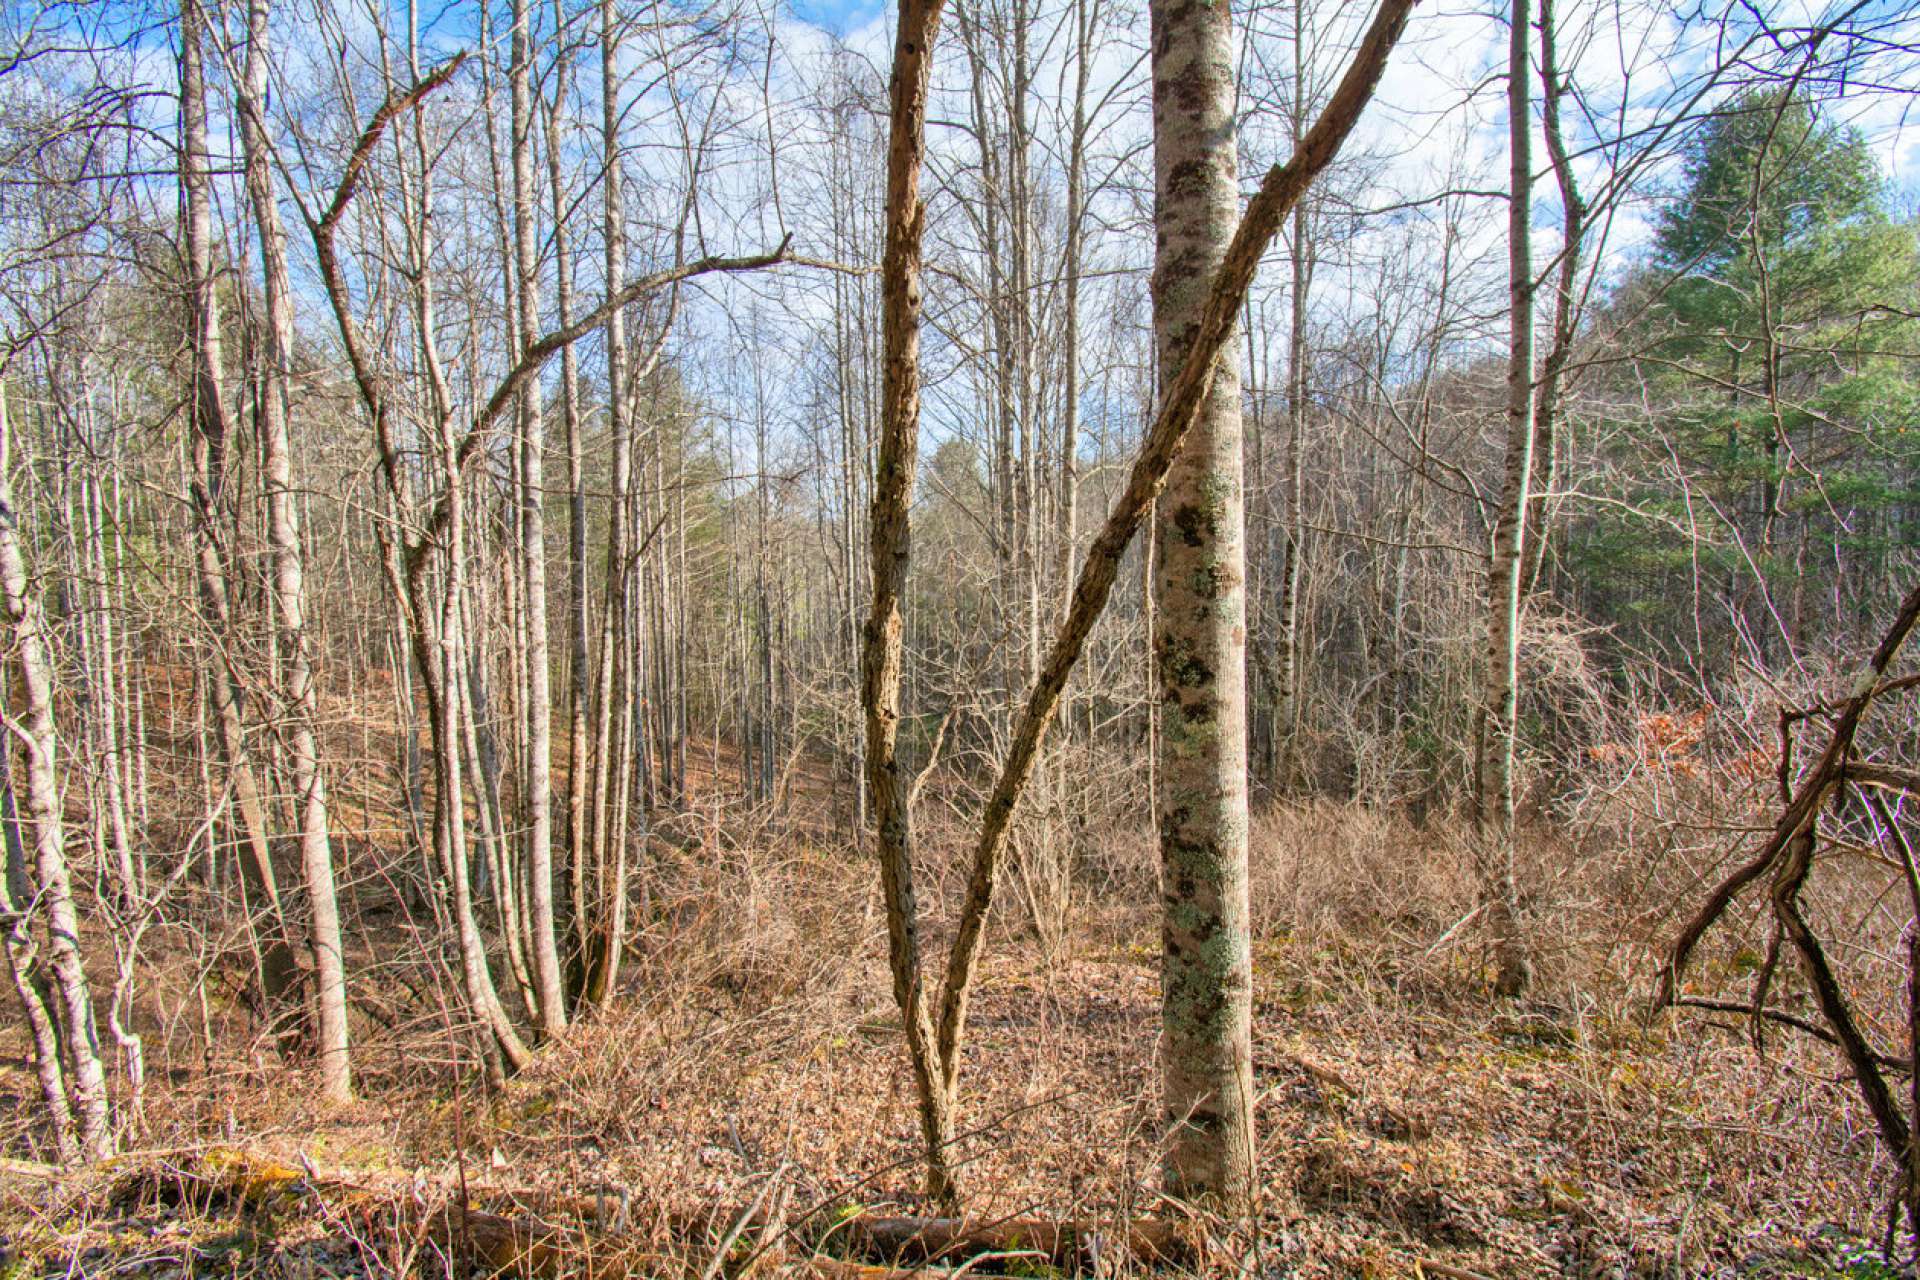 Lots 18 and 19 together for a 2.82 acre mountain homesite.